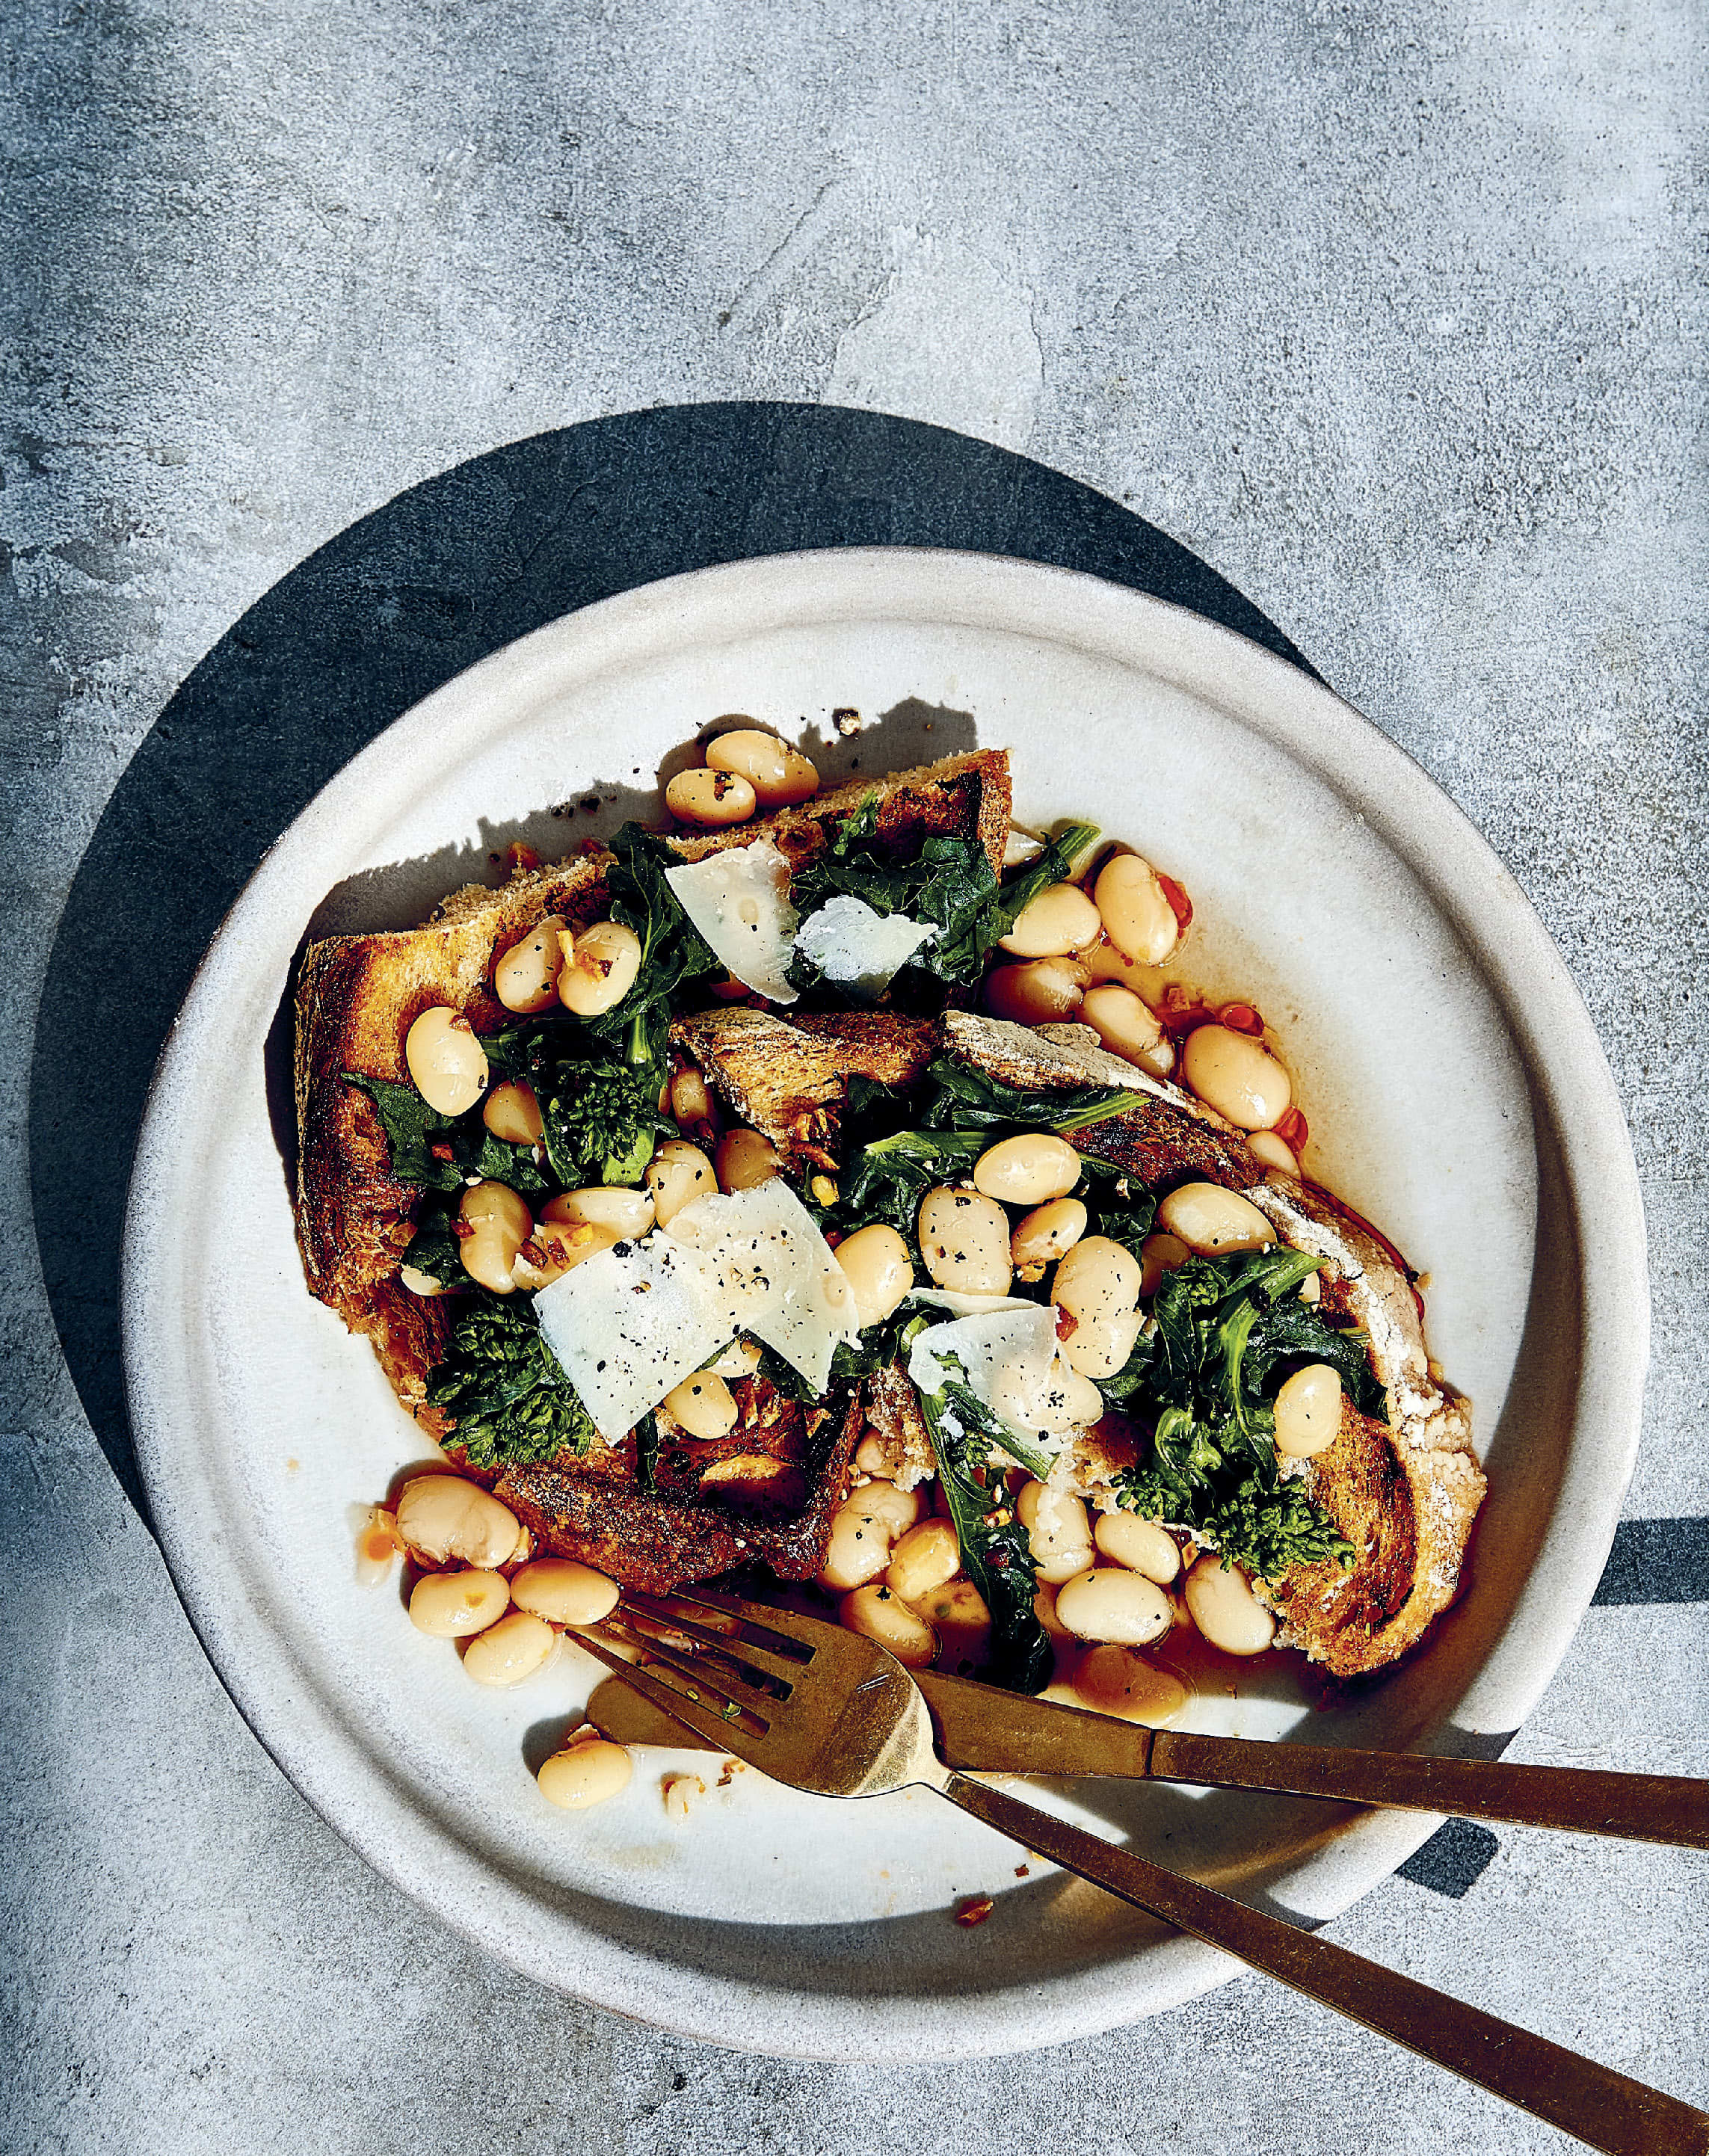 https://cdn.apartmenttherapy.info/image/upload/v1597161451/k/Edit/2020-09-Cool-Beans-Cookbook-Club/Cool_Beans_Garlicky_Great_Northern_Beans_and_Broccoli_Rabe_Over_Toast.jpg